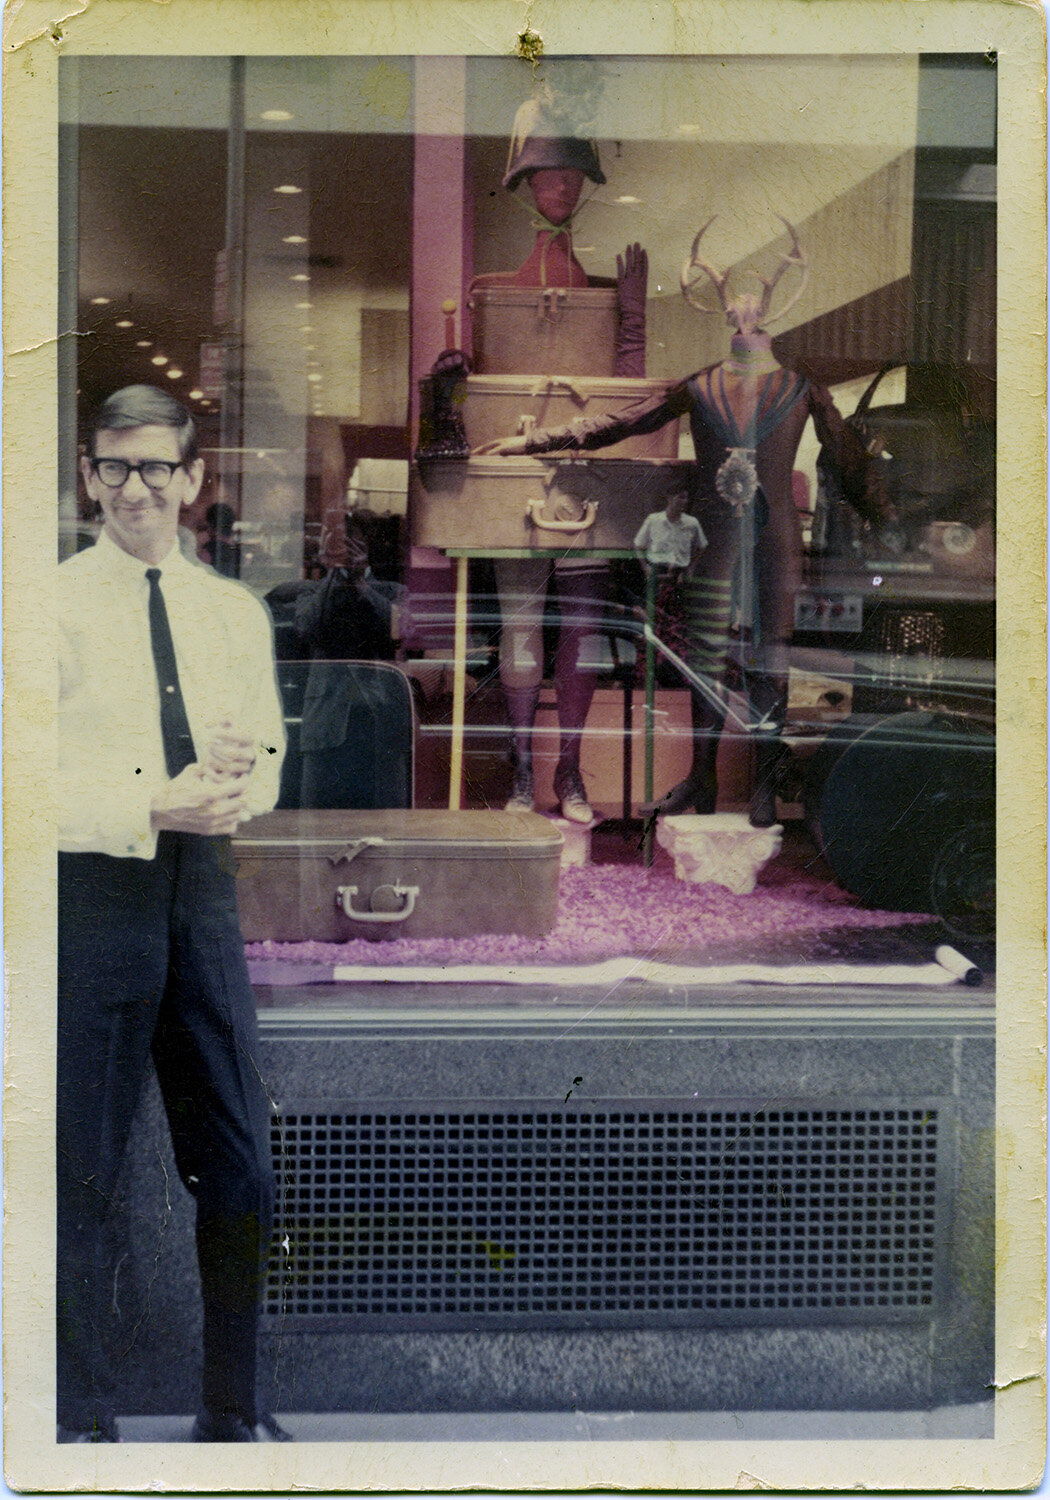 Clint Hamilton in front of (his) Bonwit Teller window design, 5th Avenue, August 4, 1966